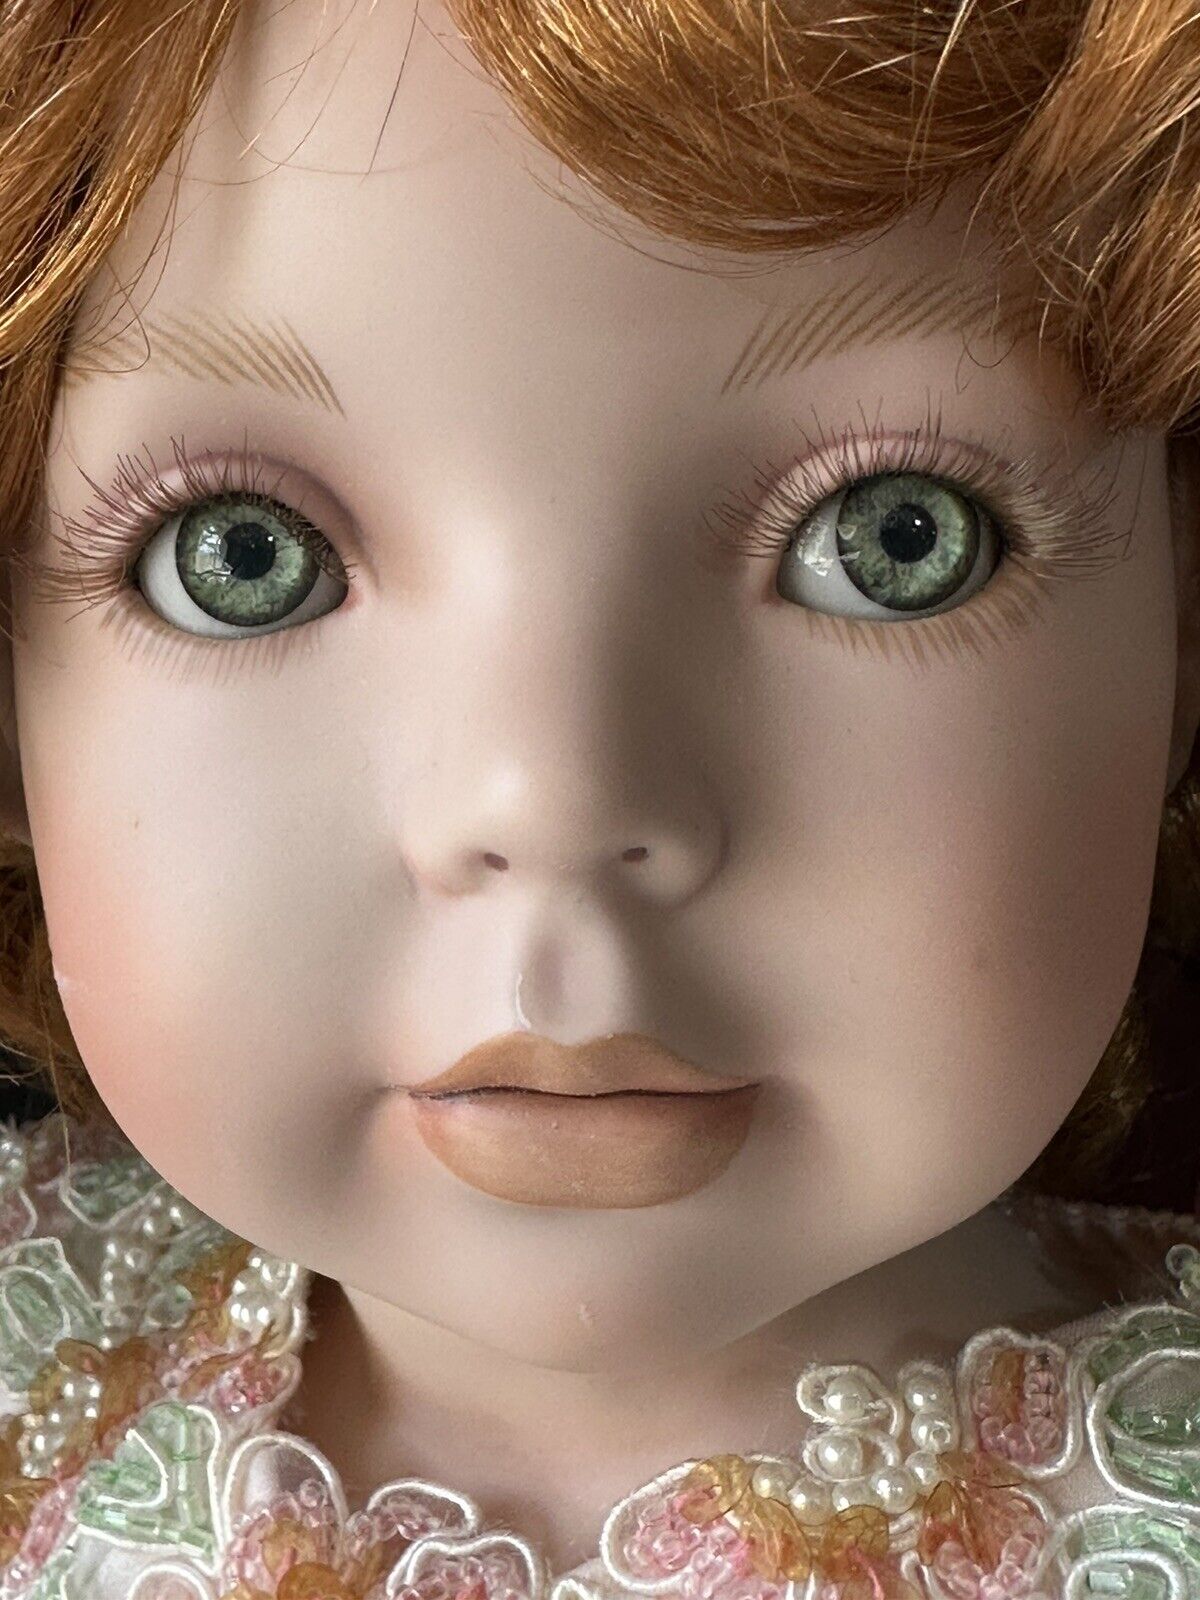 Collectible Lifelike Porcelain 24” Doll by Donna RuBert and Rustie LE 1000